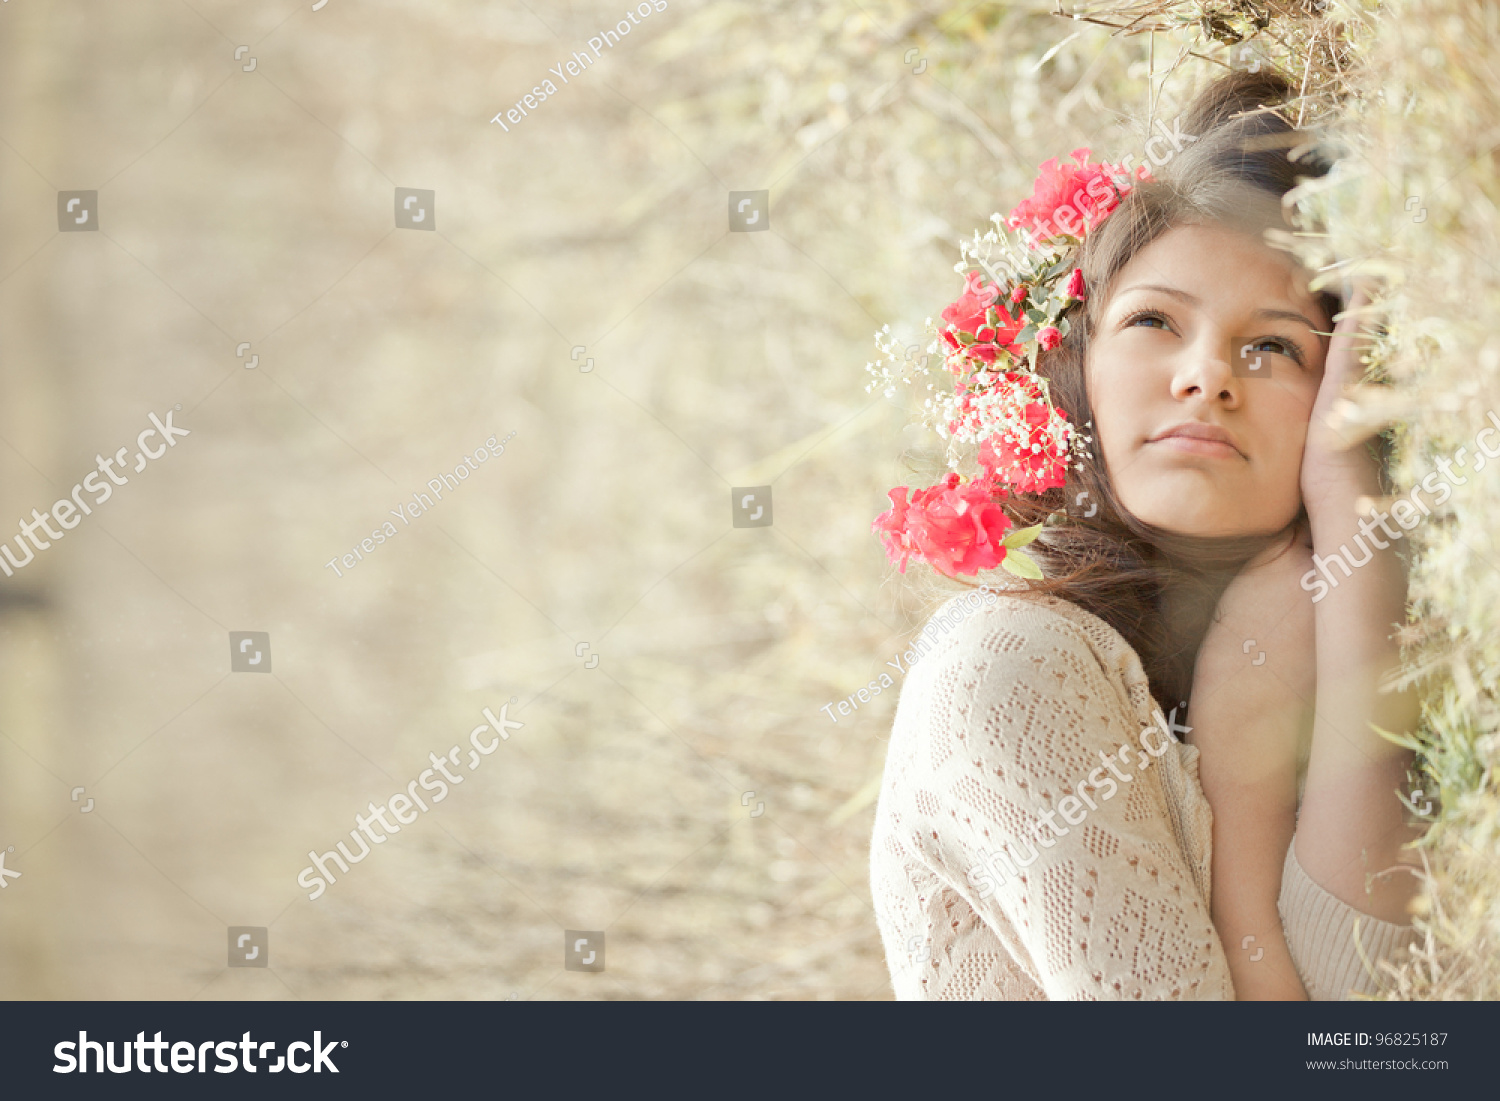 Young Girl Red Flowers Hair Lying Stock Photo Edit Now